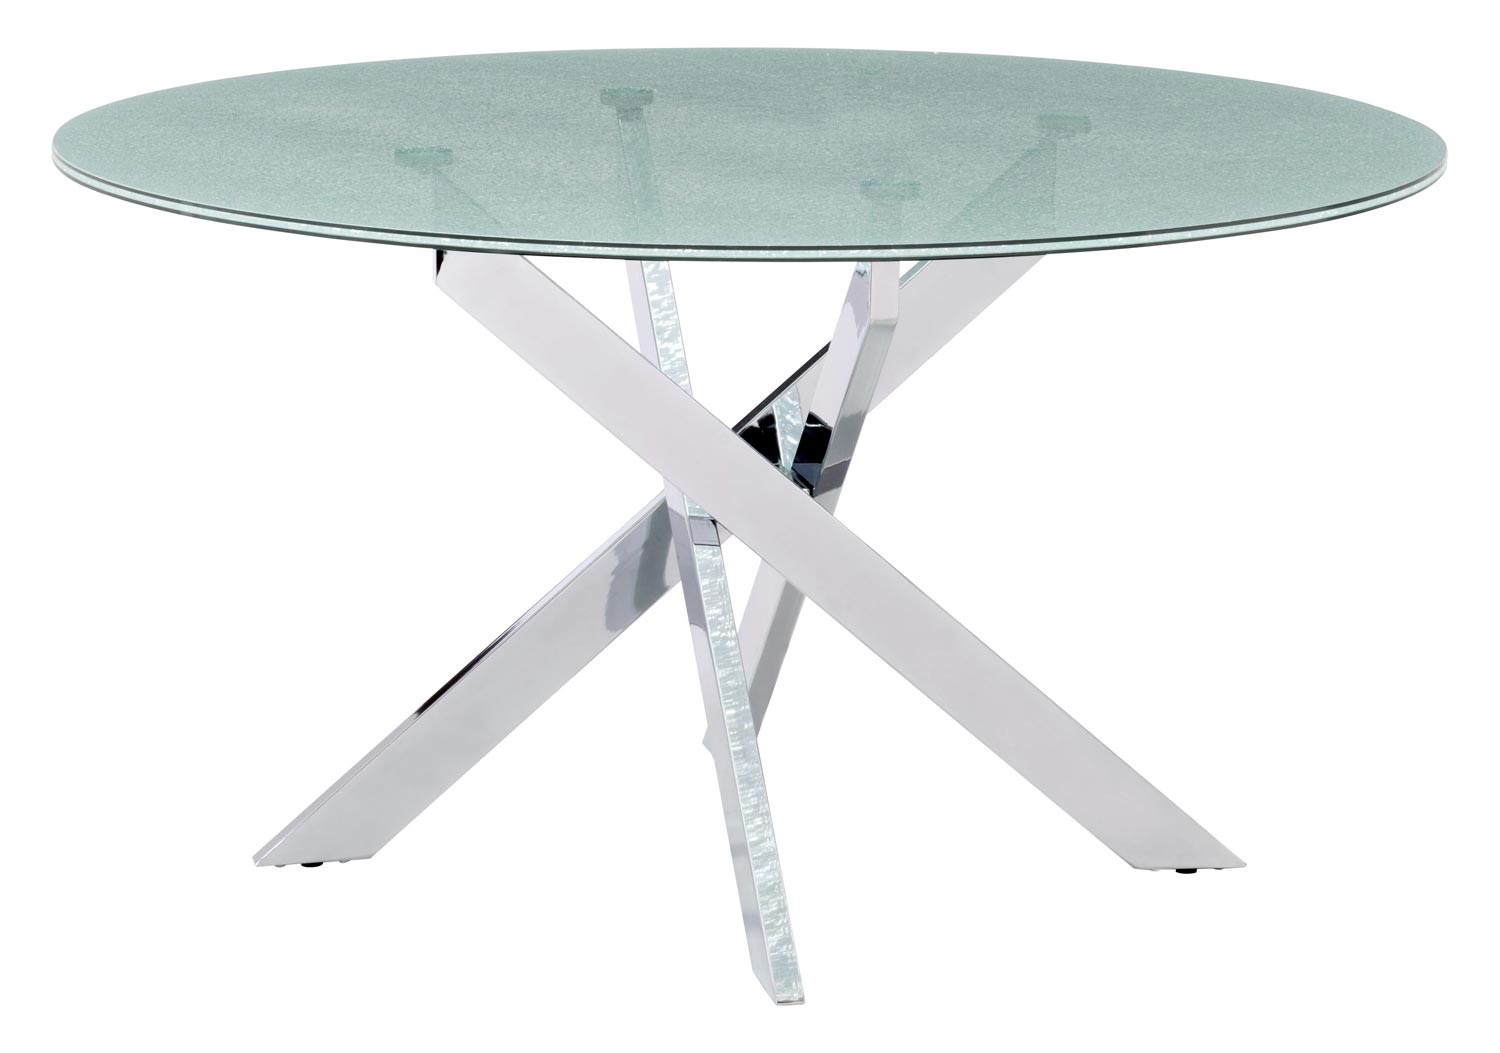 Zuo Modern Stance Dining Table - Crackled